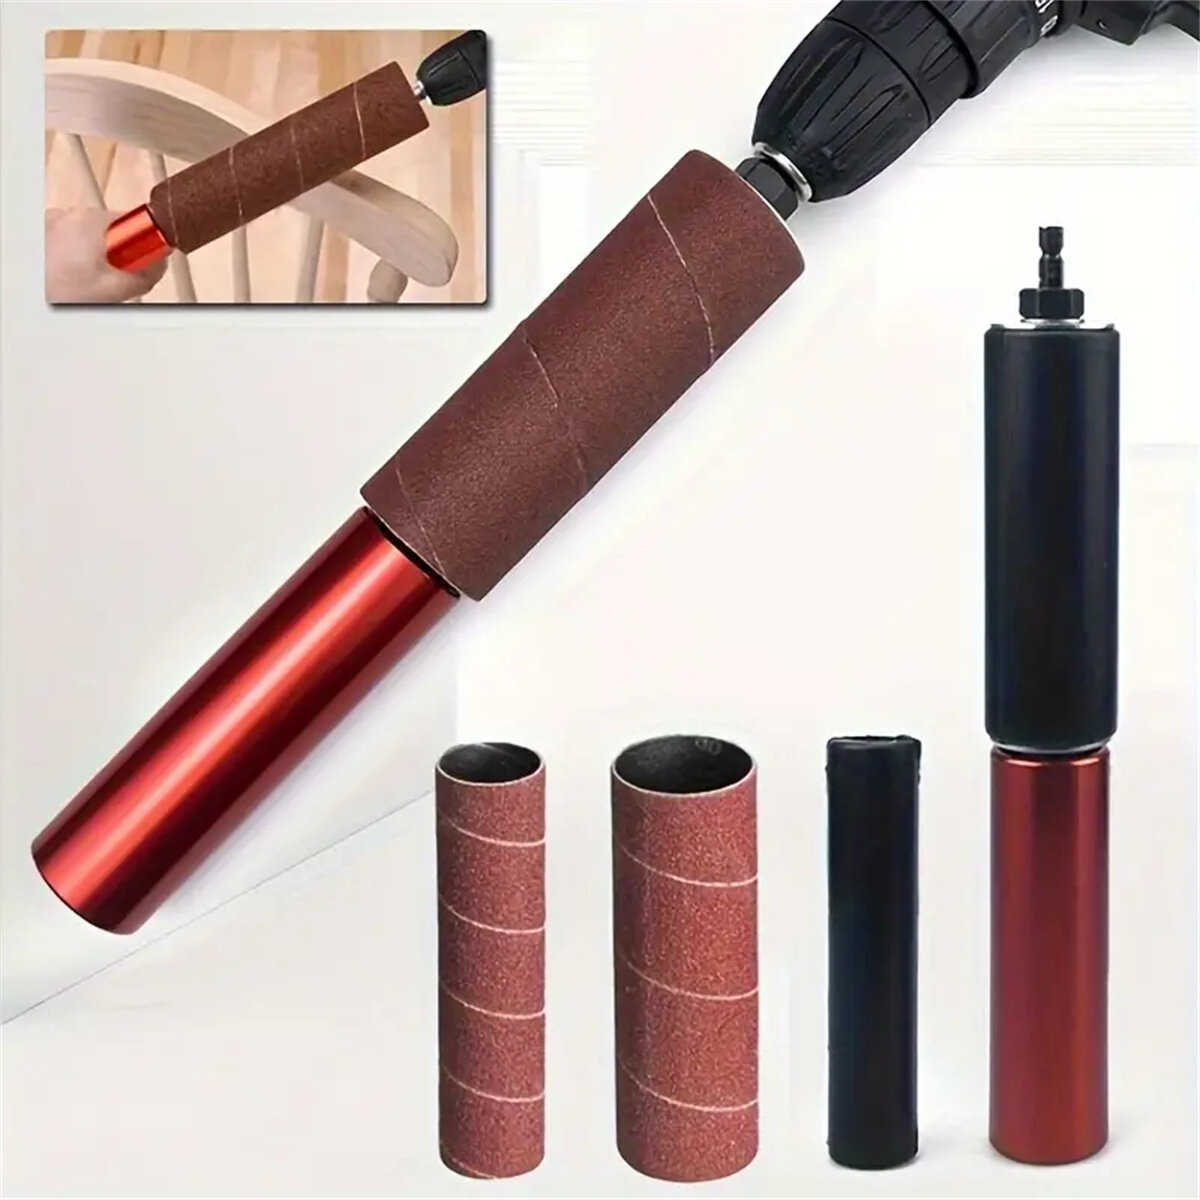 Sanding Rod 10PCS Spindle Sander Sleeves Sand Sleeves Woodworking Sanding Wood Metal Plastic Stone Mini Sanding Machine Electric Drill Attachment Lithium Electric Drill Conversion